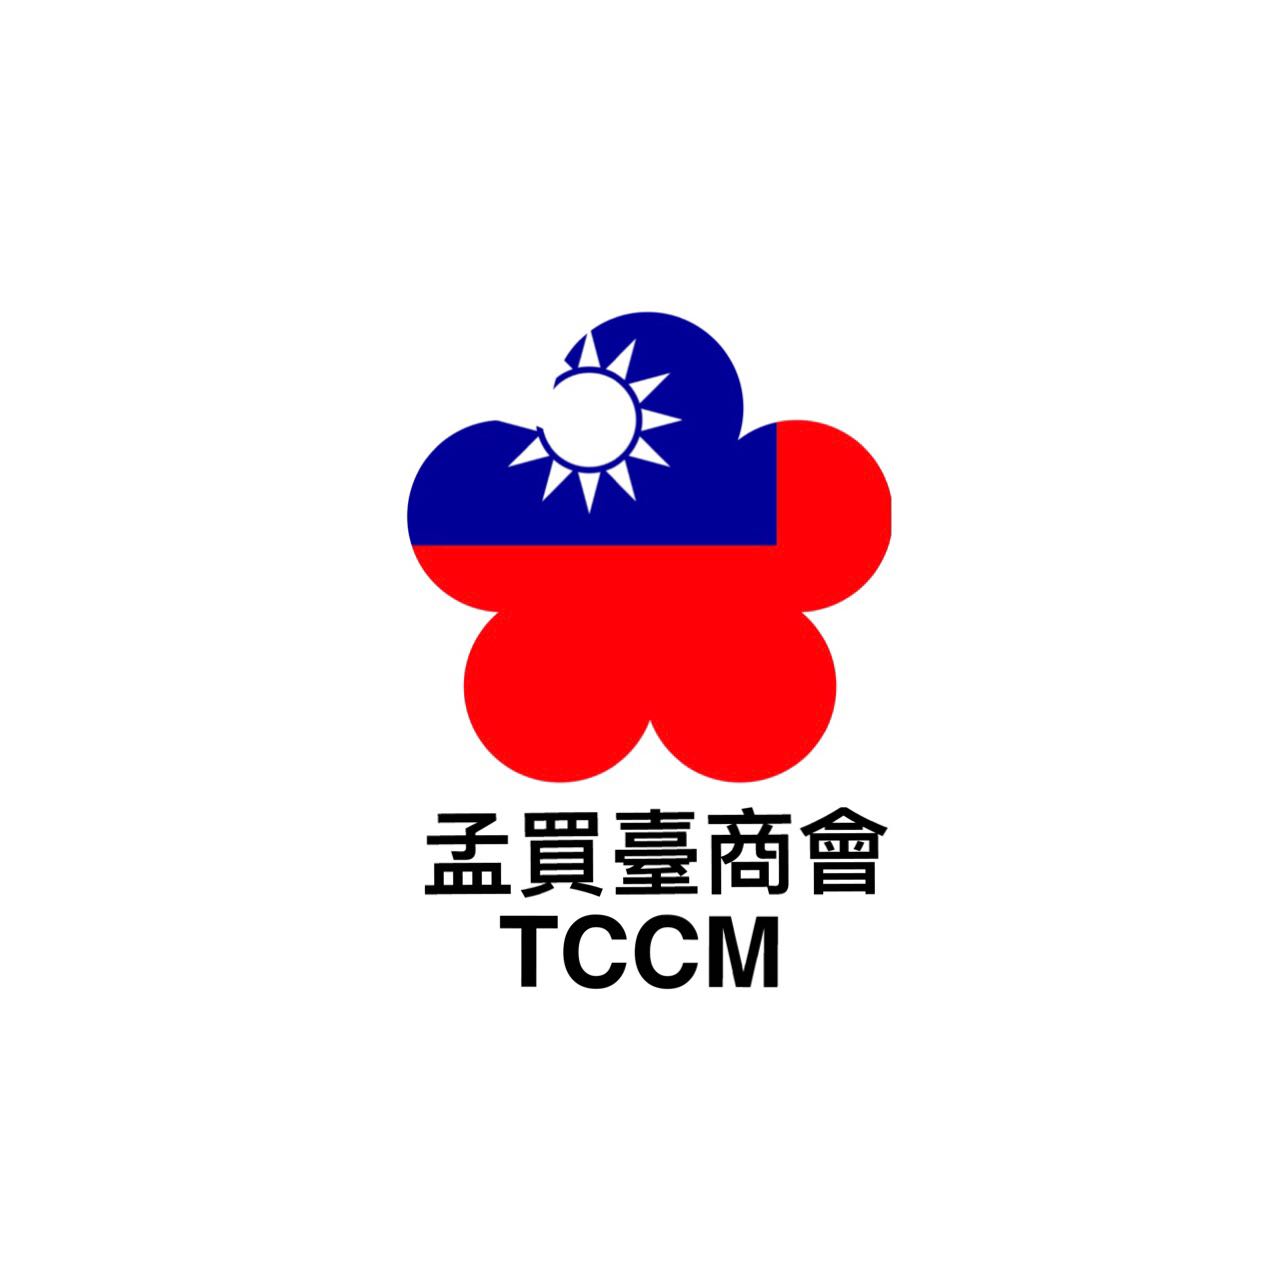 Taiwan Chamber of Commerce